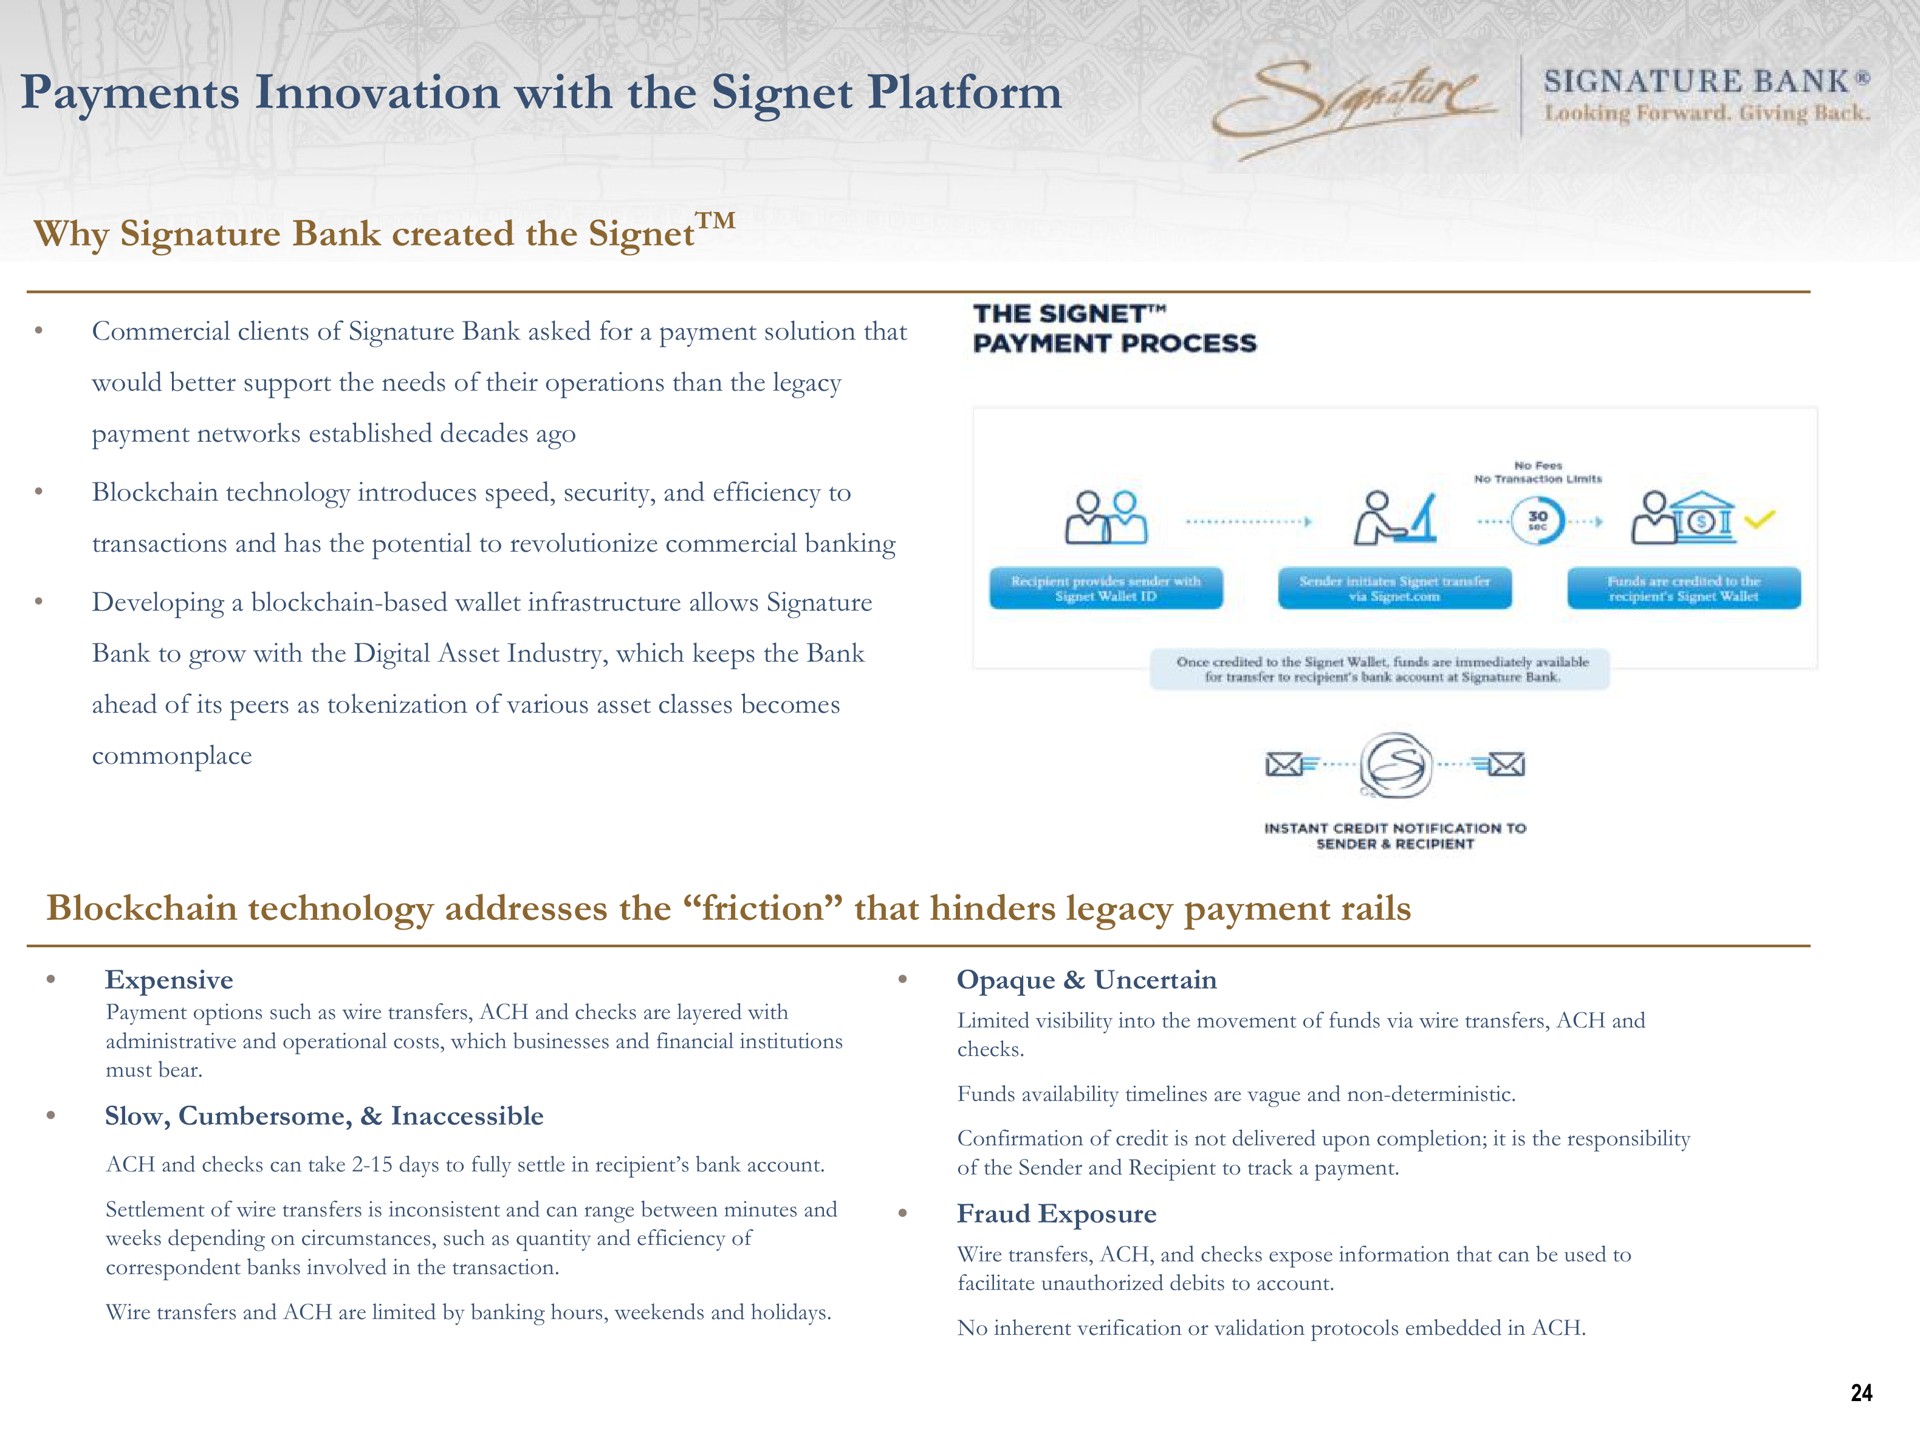 payments innovation with the signet platform why signature bank created technology addresses friction that hinders legacy payment rails | Signature Bank